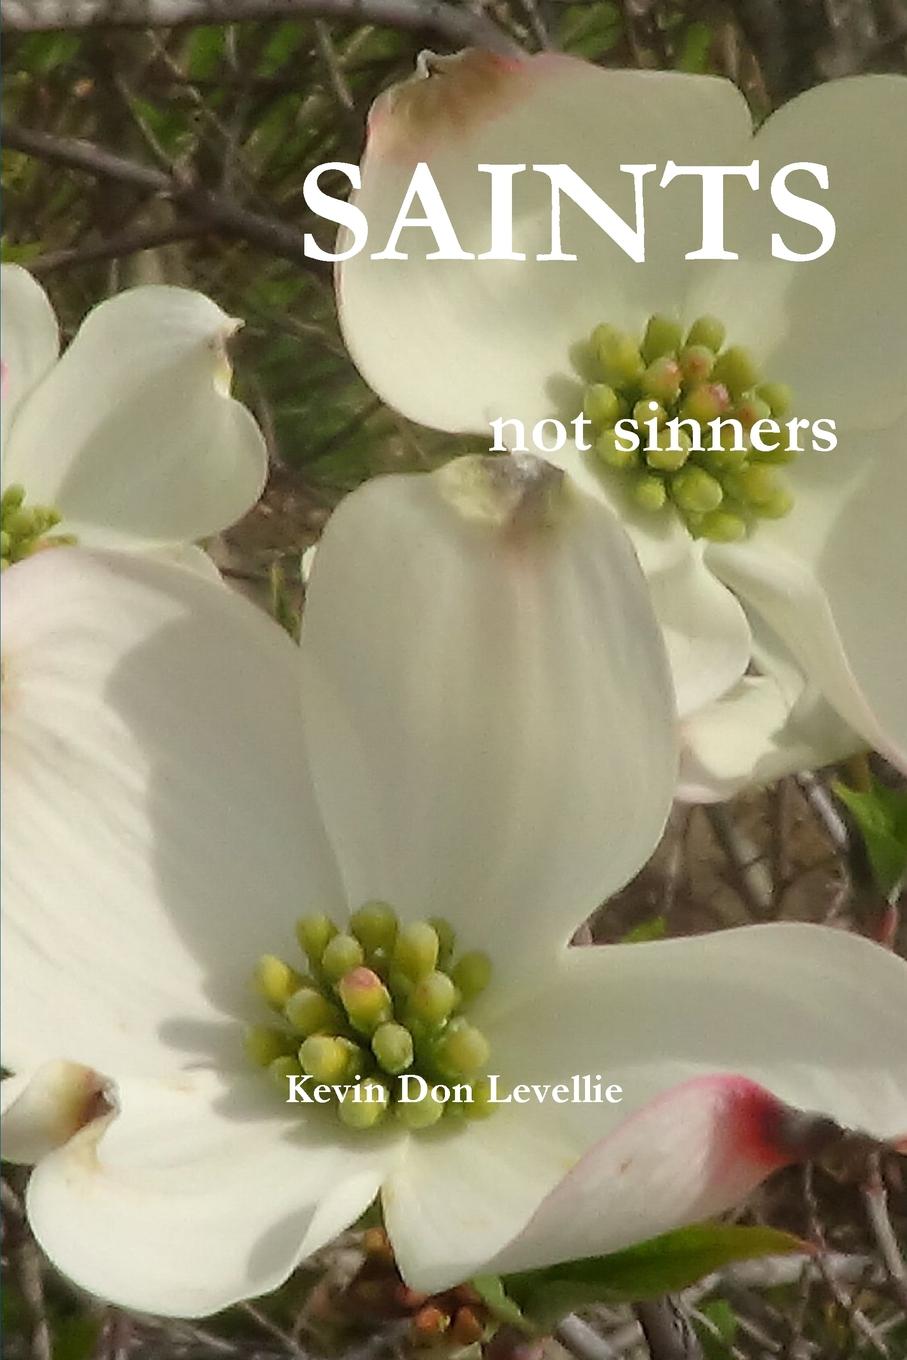 Kevin Don Levellie SAINTS not sinners